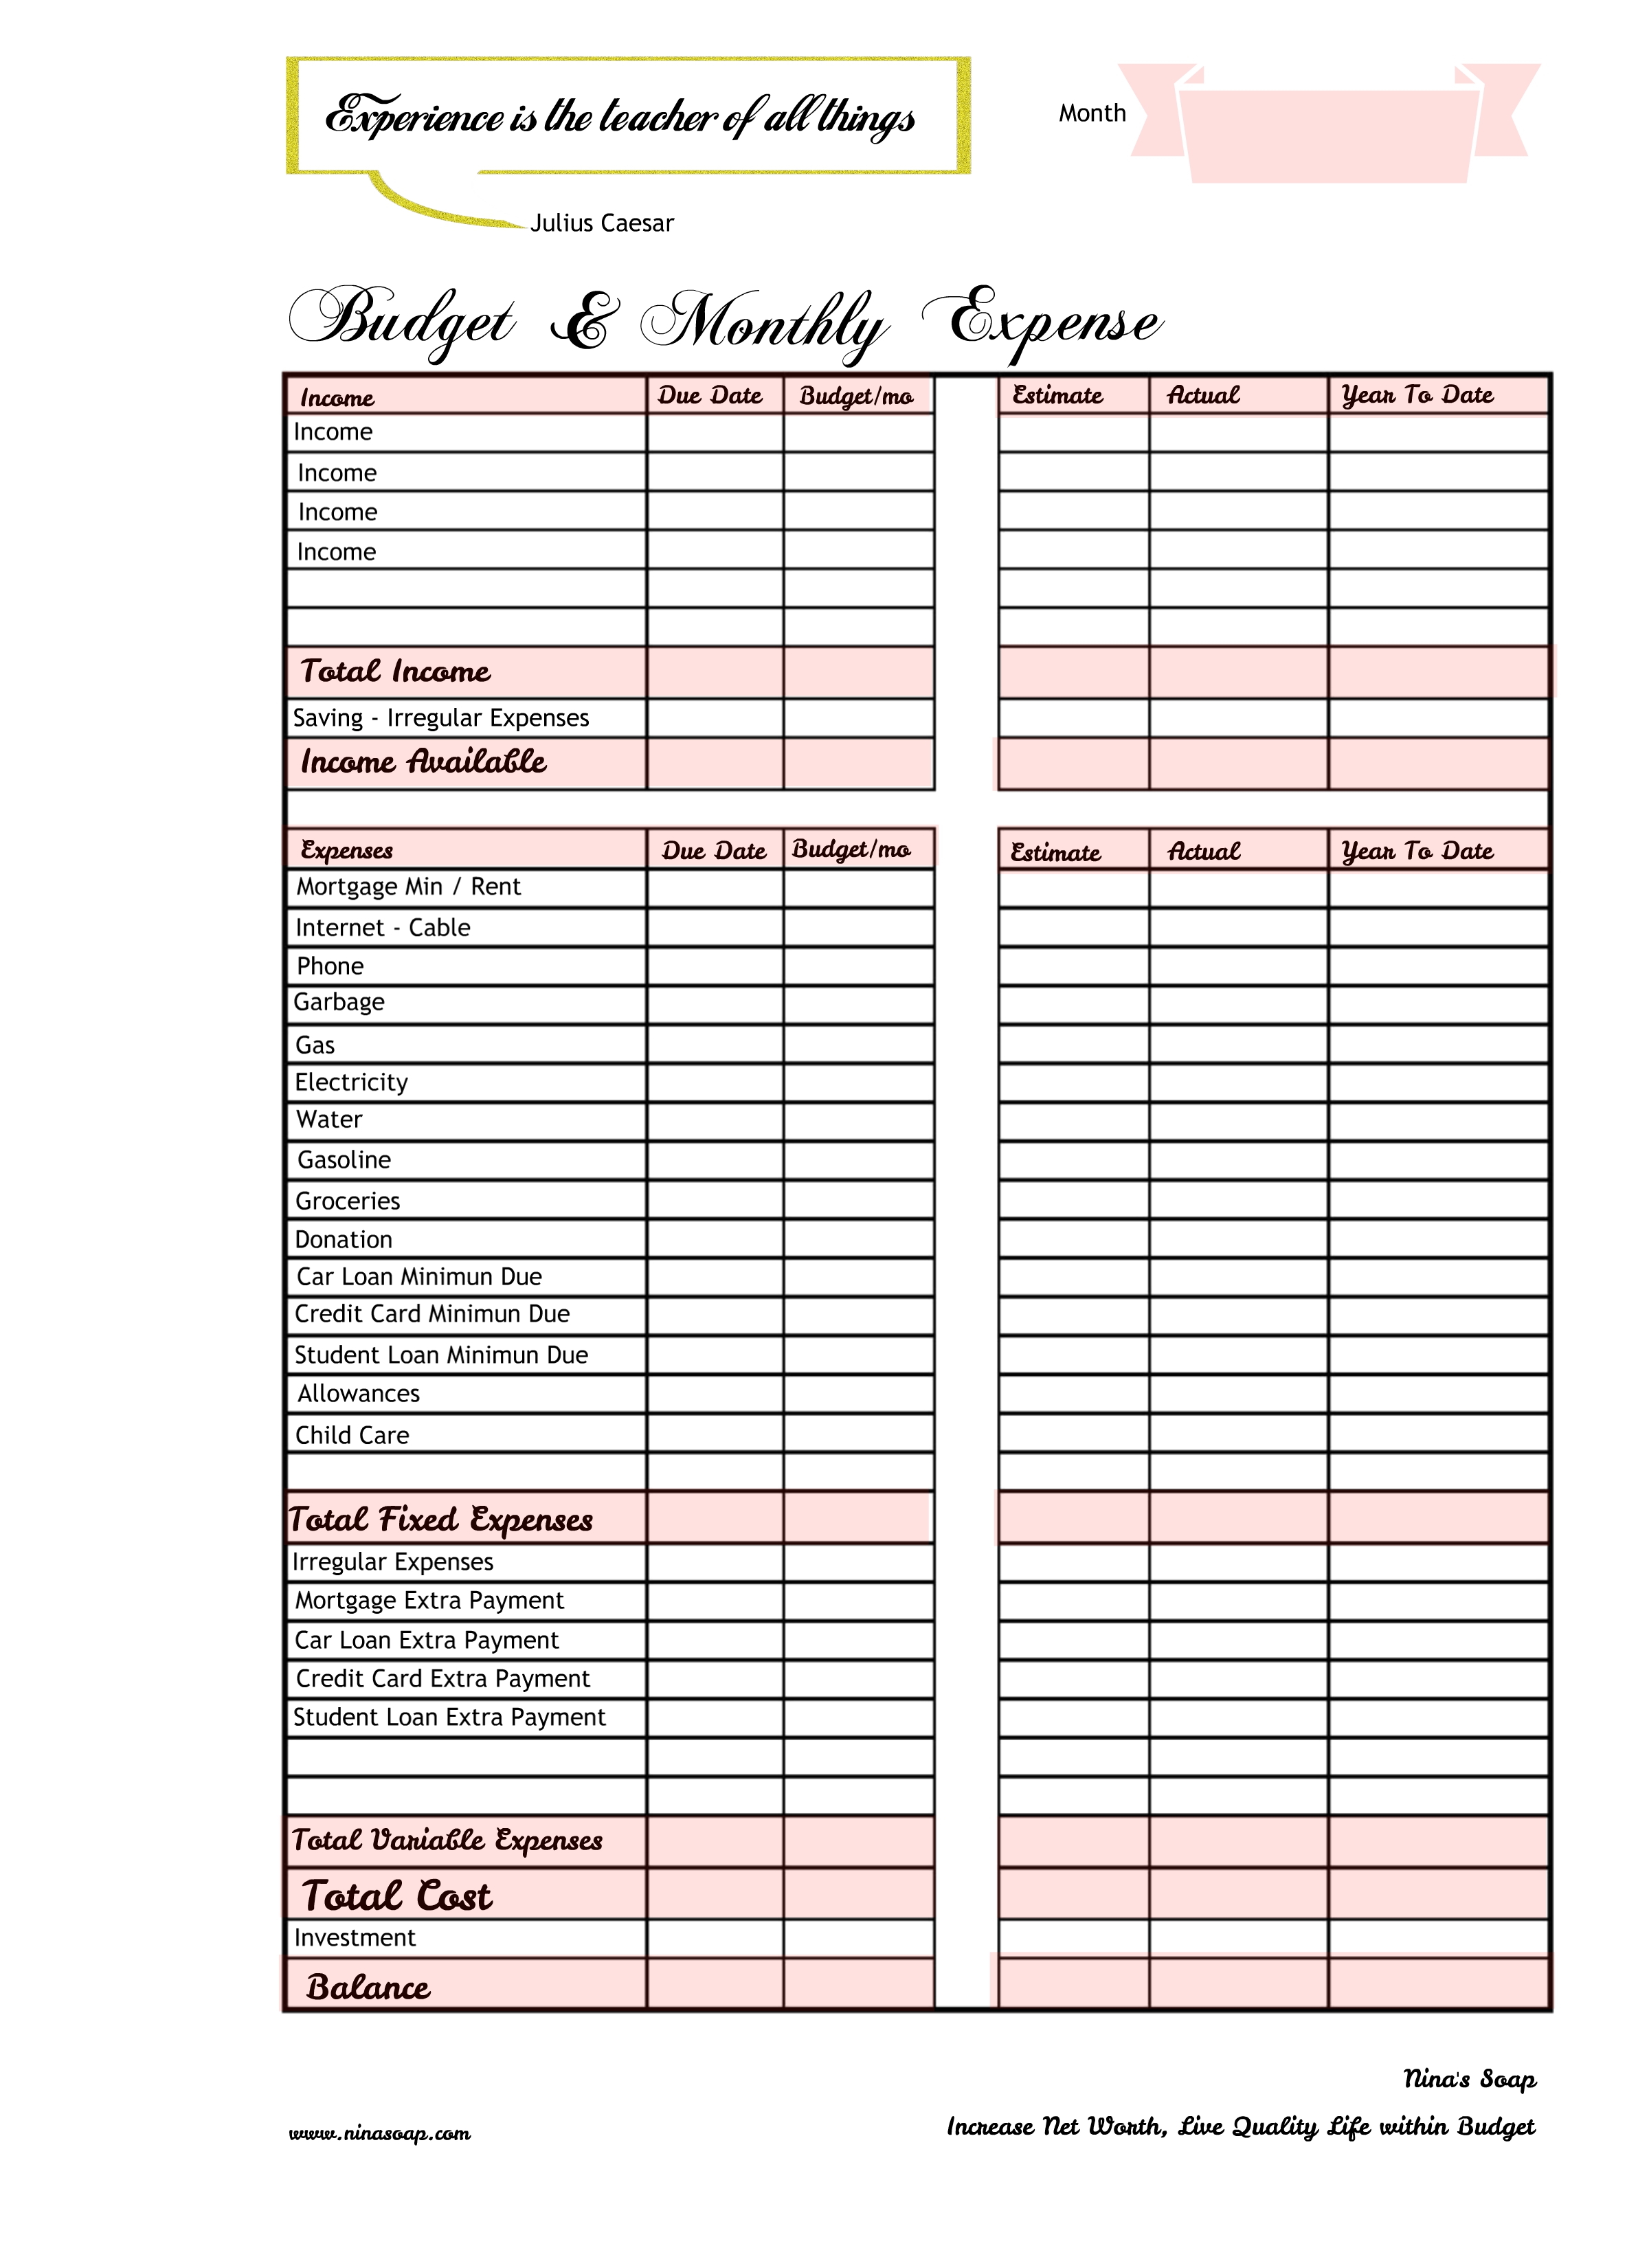 Free income and expense worksheet klolike